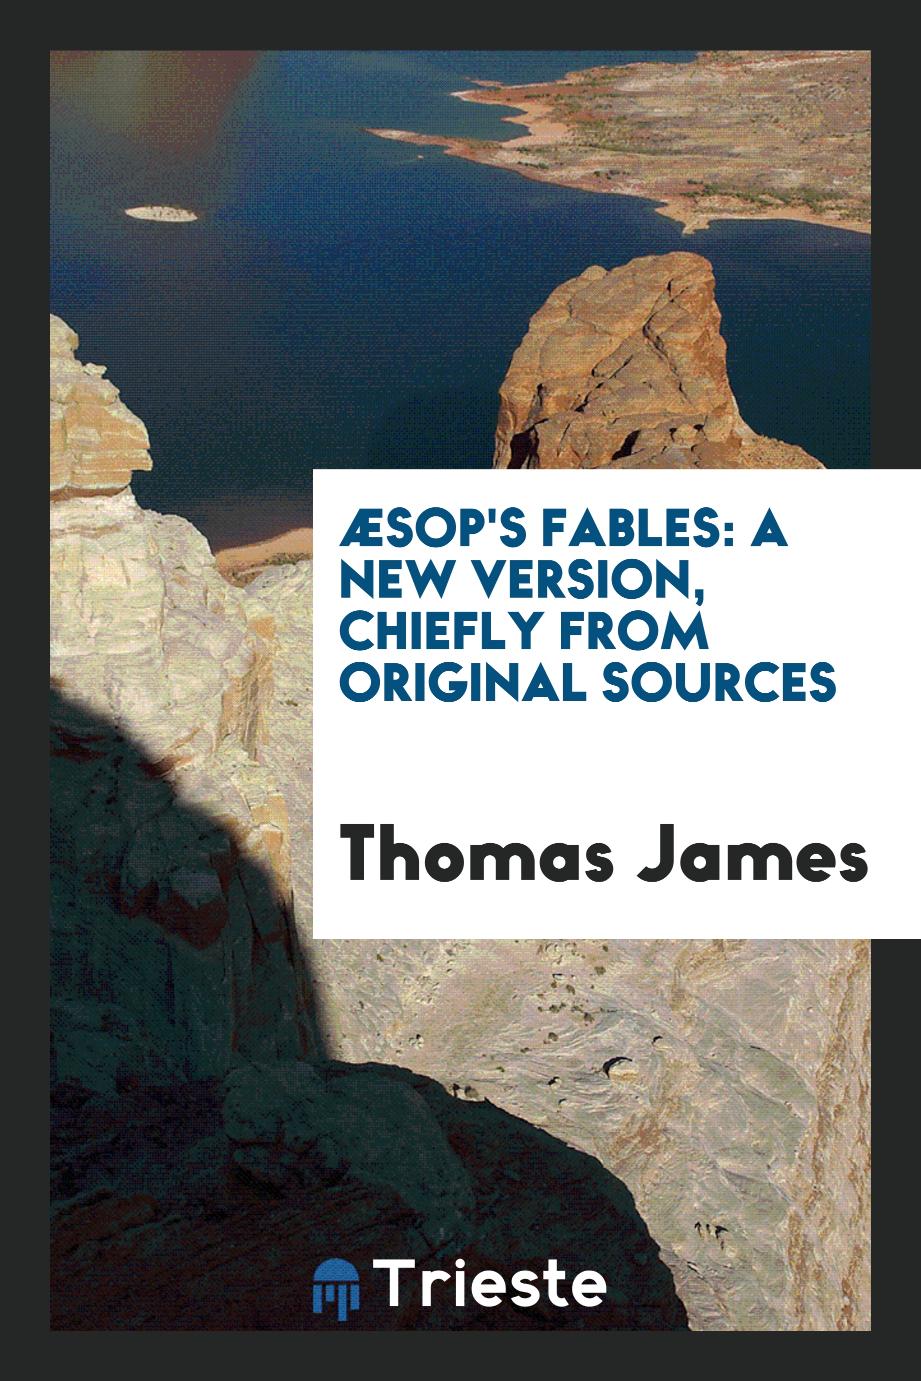 Æsop's fables: a new version, chiefly from original sources